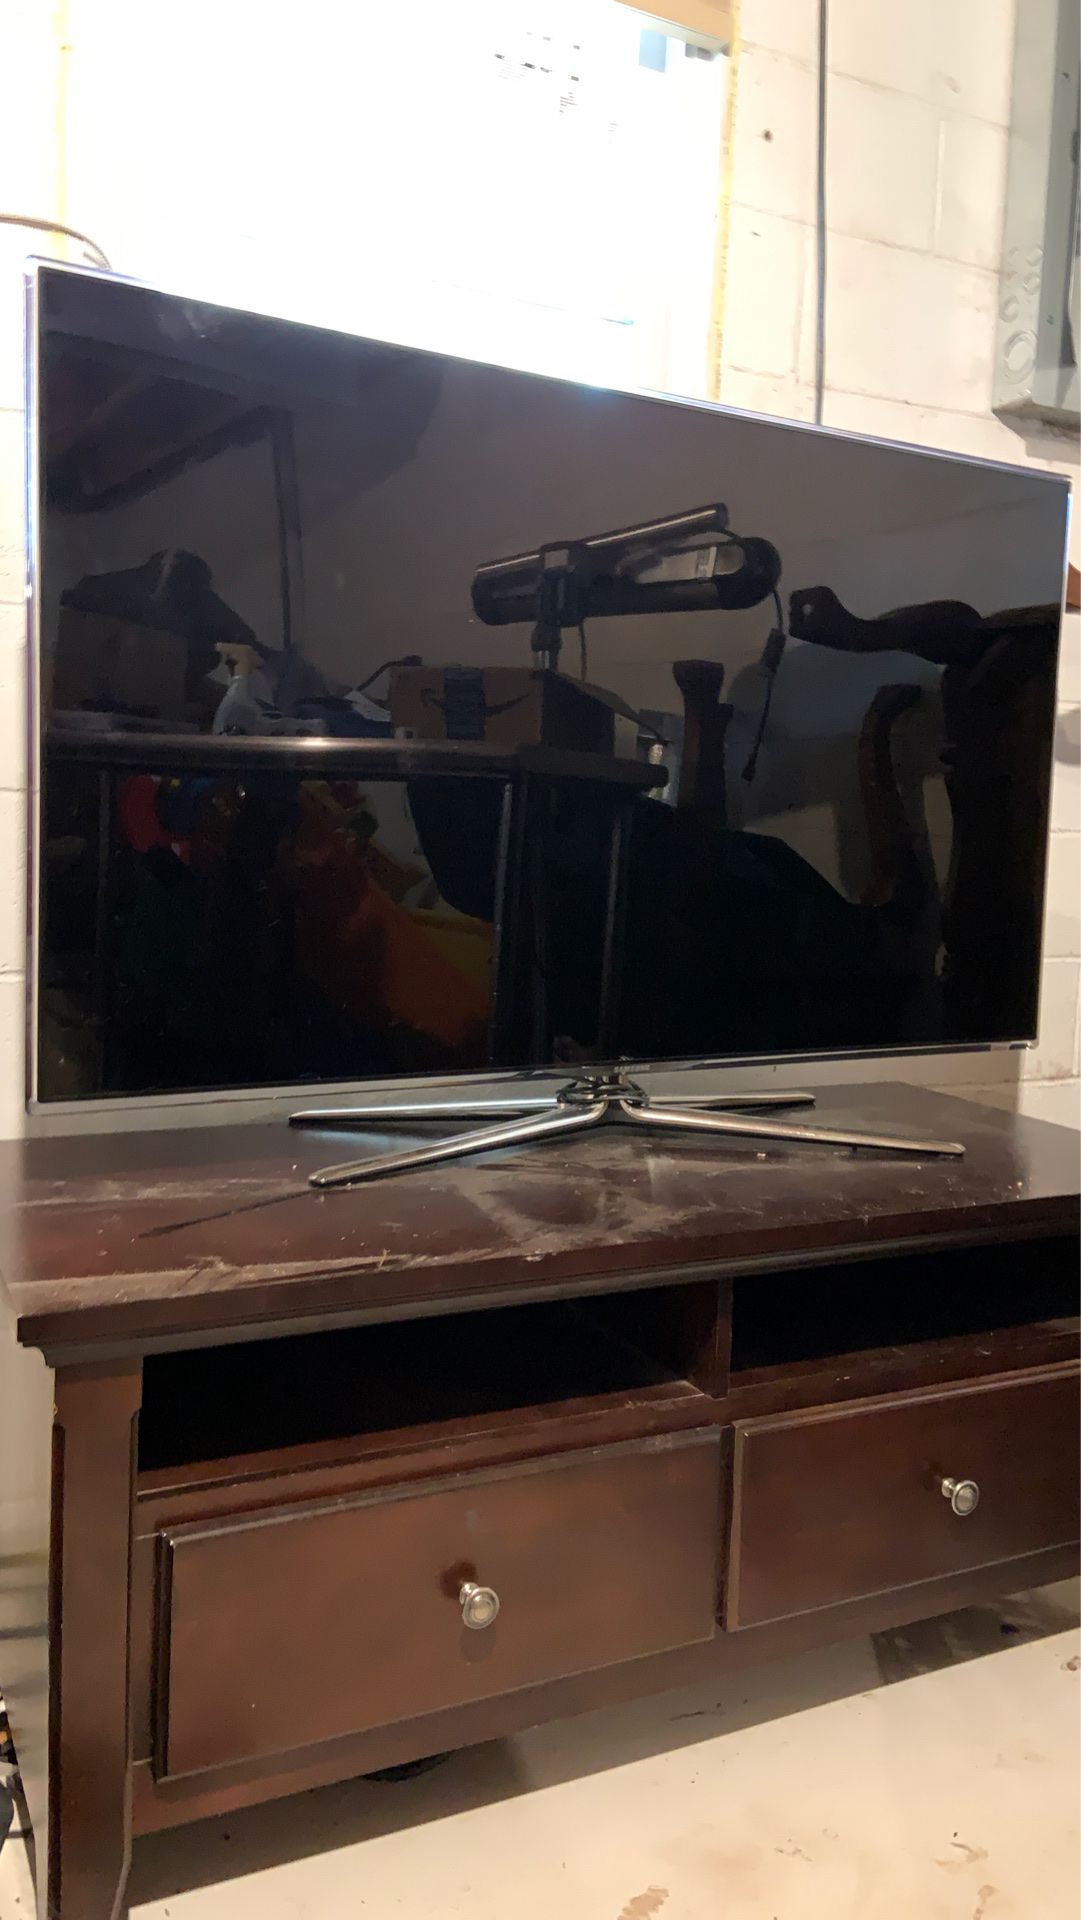 Tv console table and 55” Samsung smart 3D tv